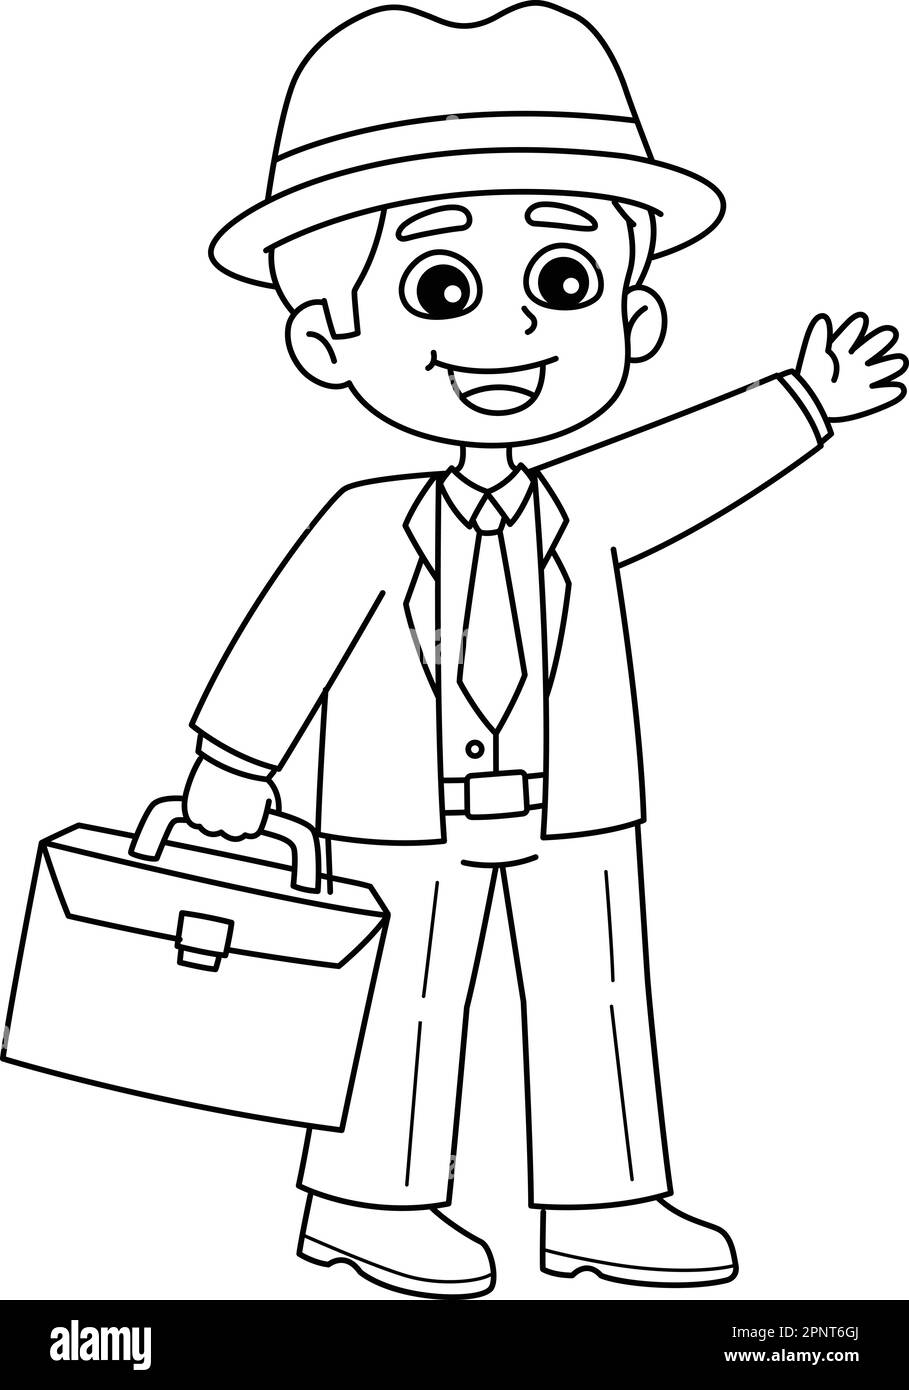 https://c8.alamy.com/comp/2PNT6GJ/father-holding-briefcase-isolated-coloring-page-2PNT6GJ.jpg